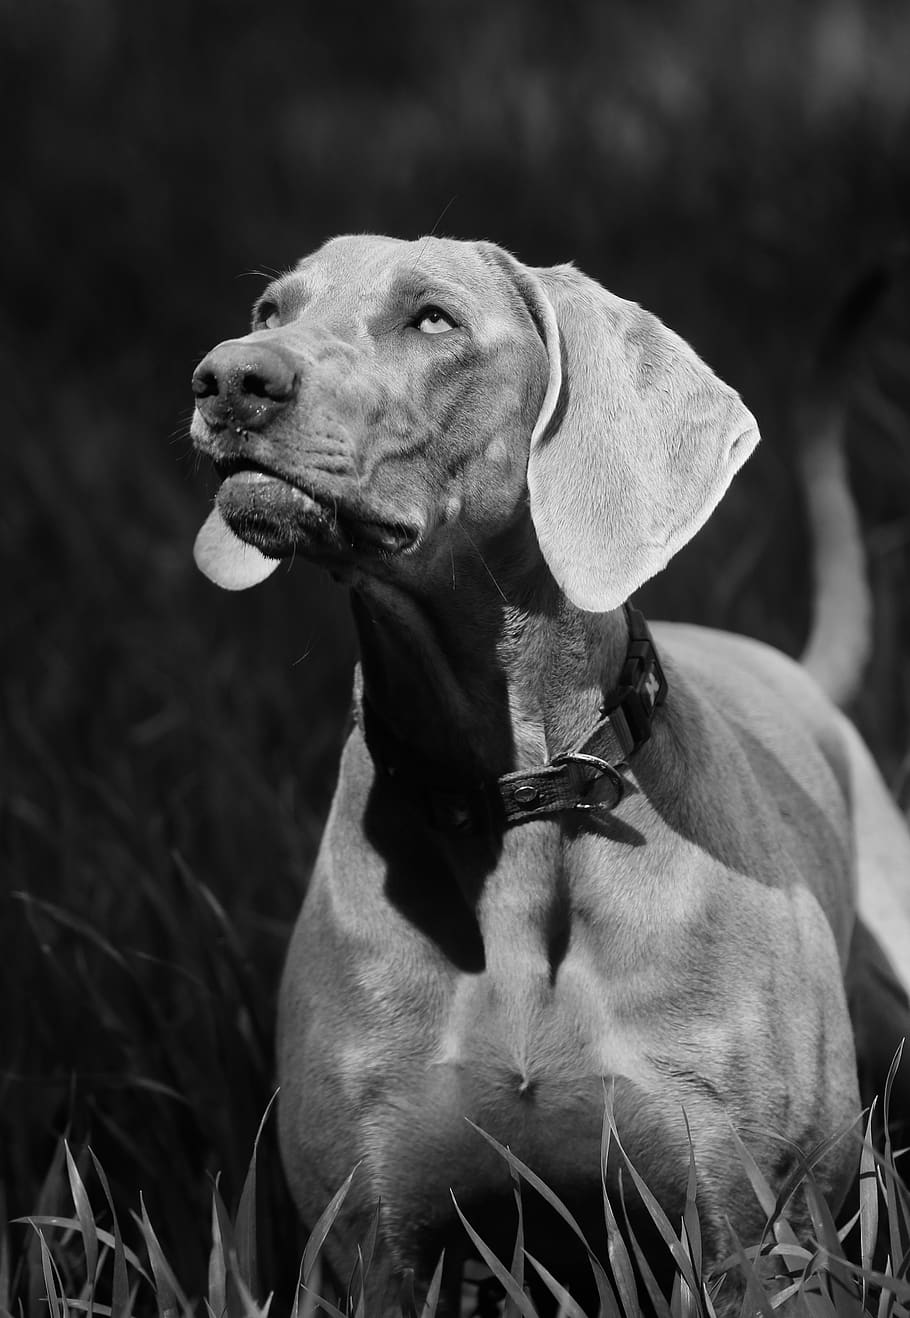 grayscale photography of dog standing on grass, mammal, animal